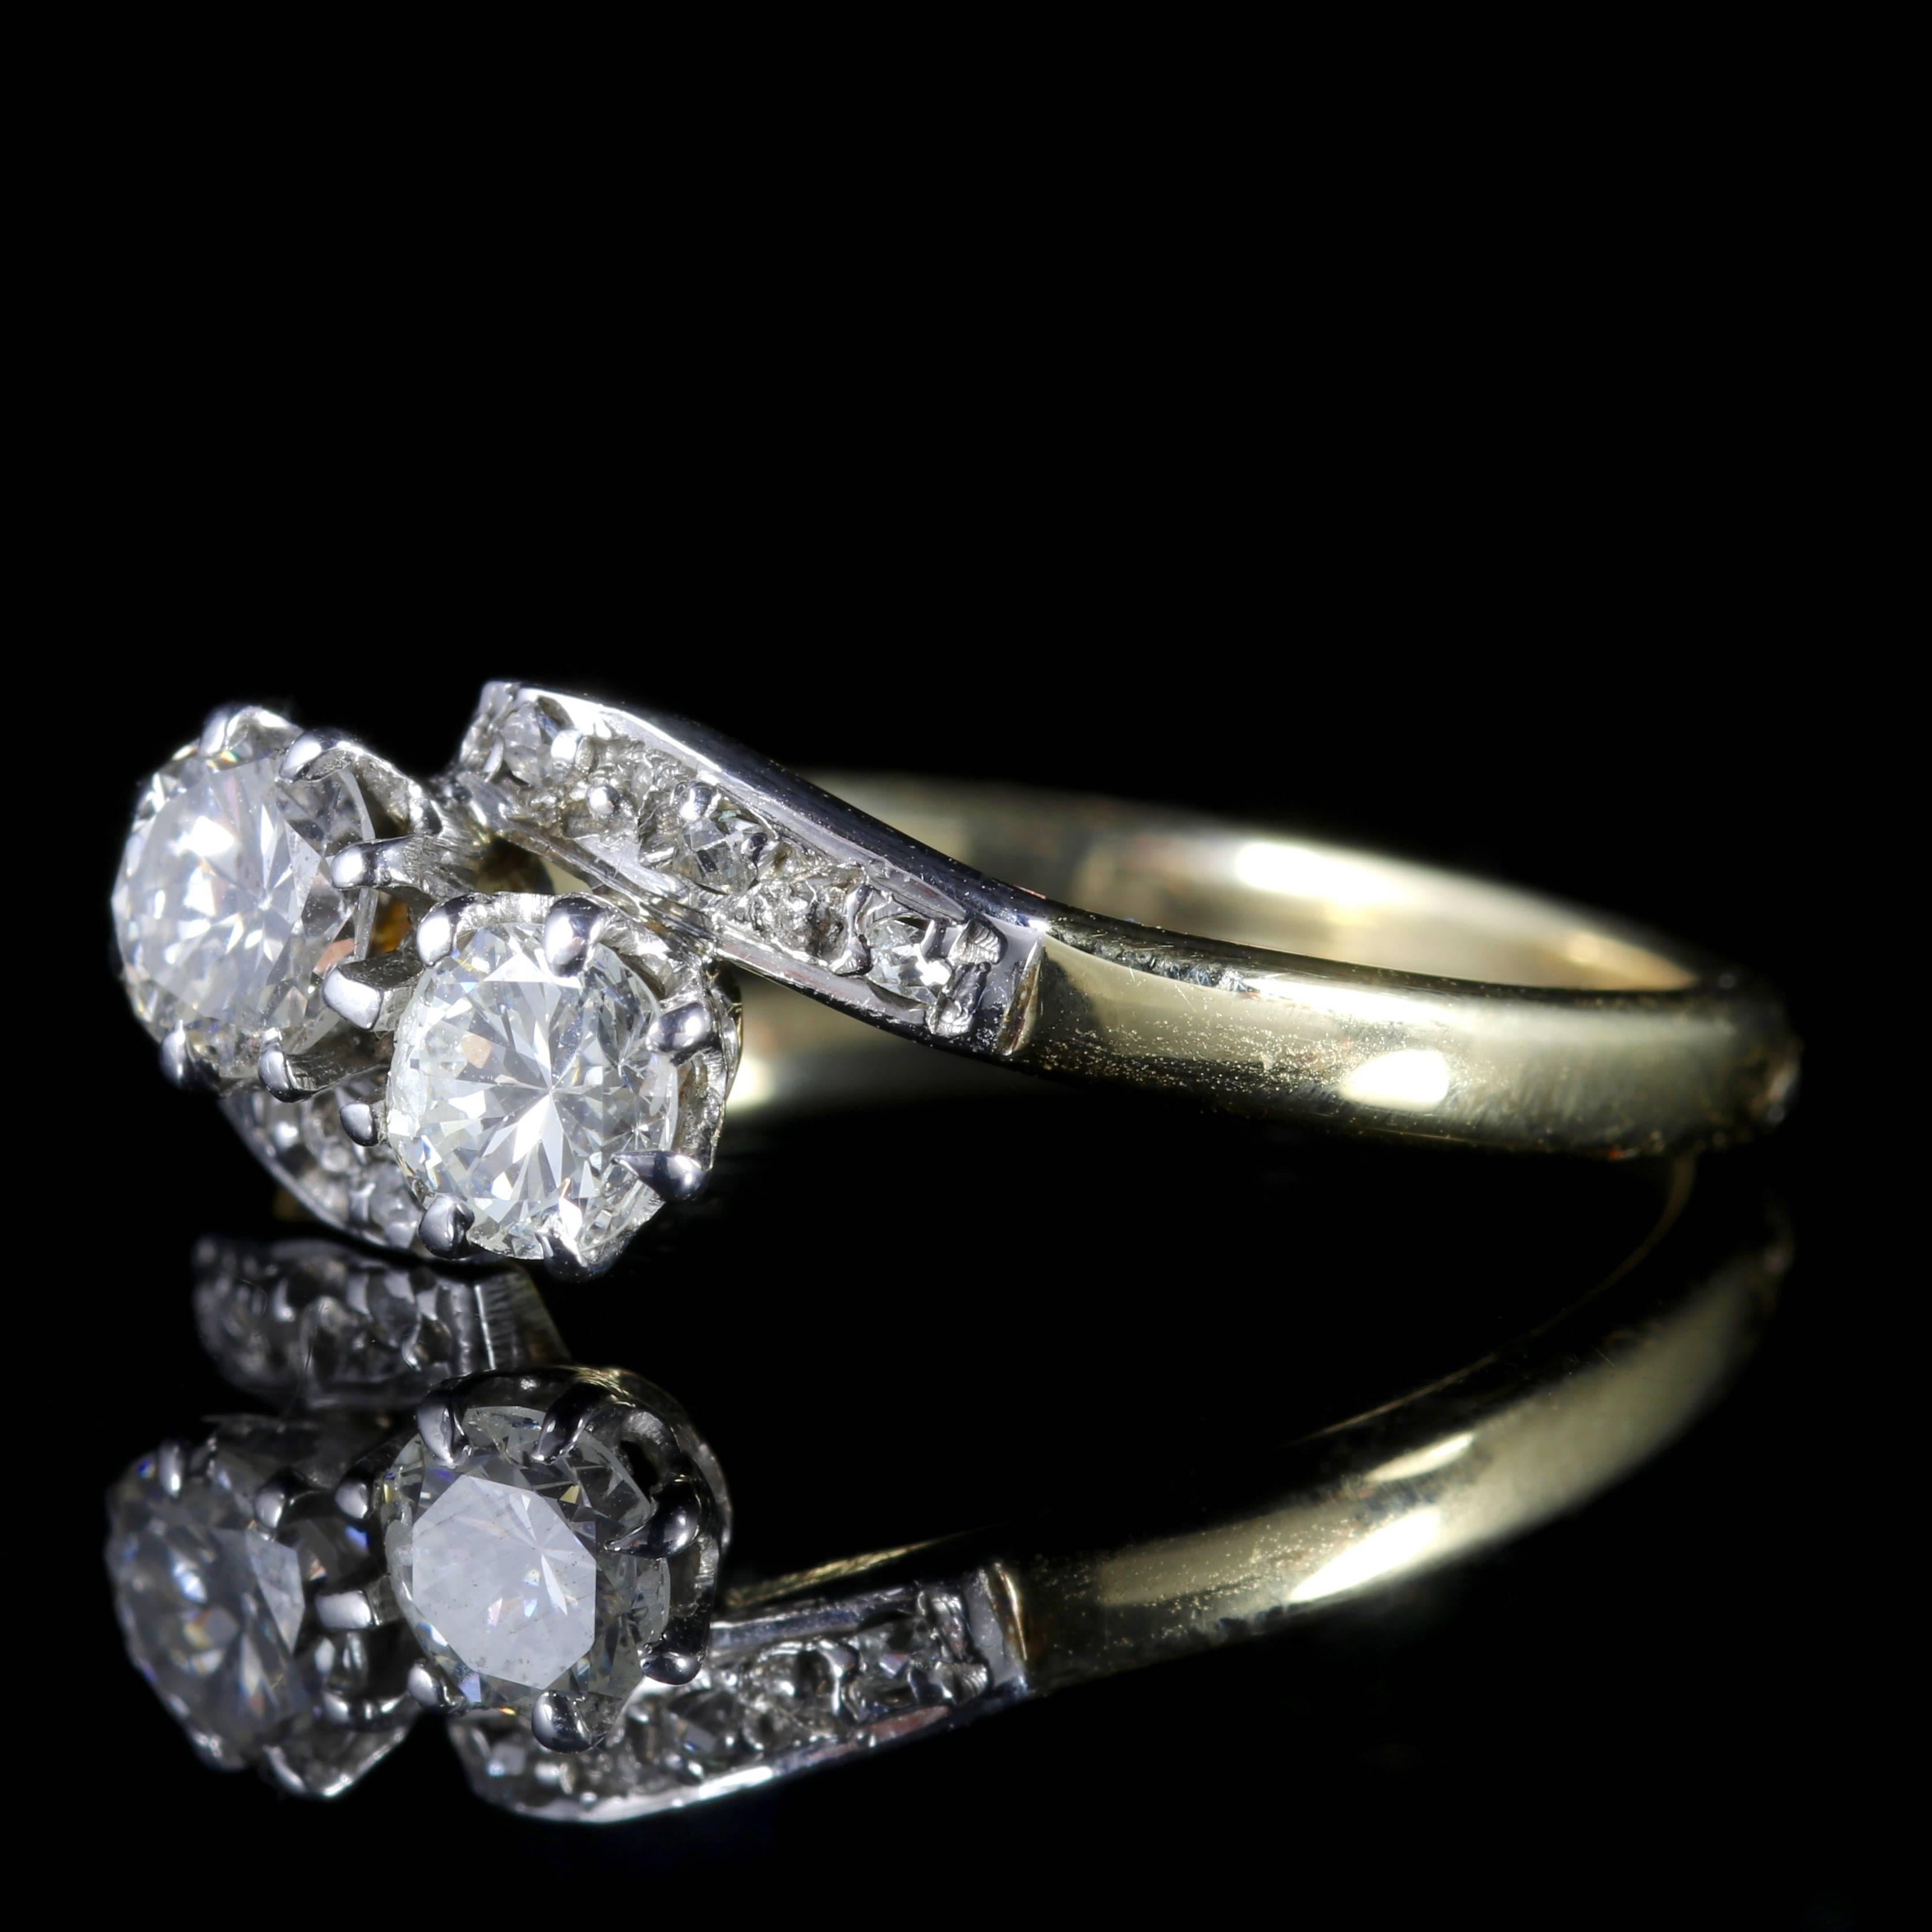 To read more please click continue reading below-

This genuine Antique Edwardian 18ct Gold and Platinum double twist ring is Circa 1910.

Two lovely old cut Diamonds sit in the central gallery with smaller Diamonds chasing down each shoulder.